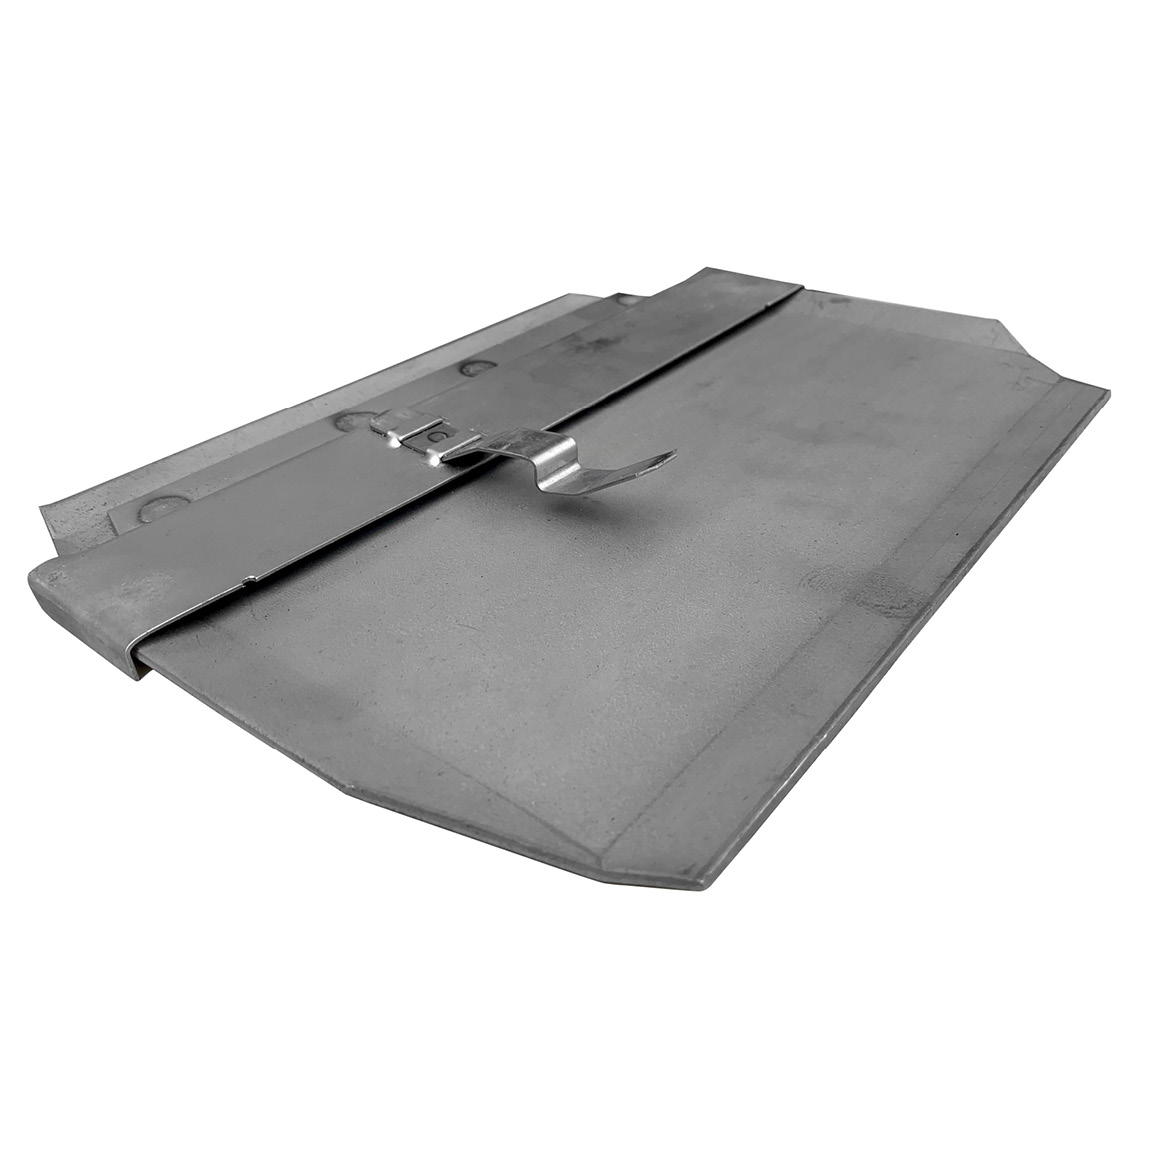 Concrete float blade shoes are used to as a concrete finishing tool. These can be slipped onto the ride-on power trowels blades as a replacement for pans. Available from Speedcrete.